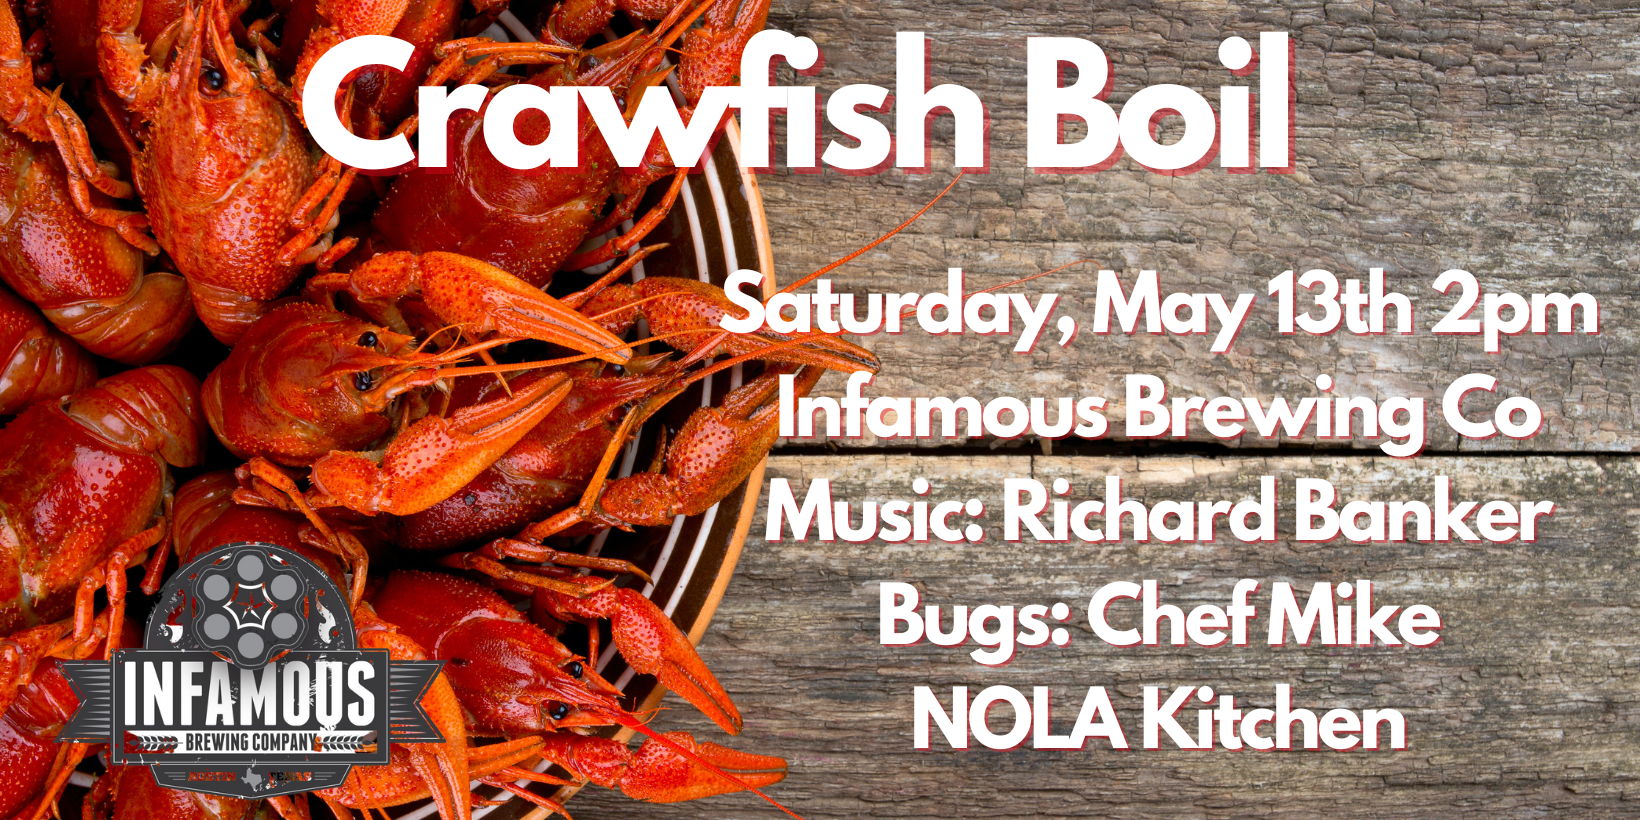 Crawfish, Live Music and Infamous Beer promotional image